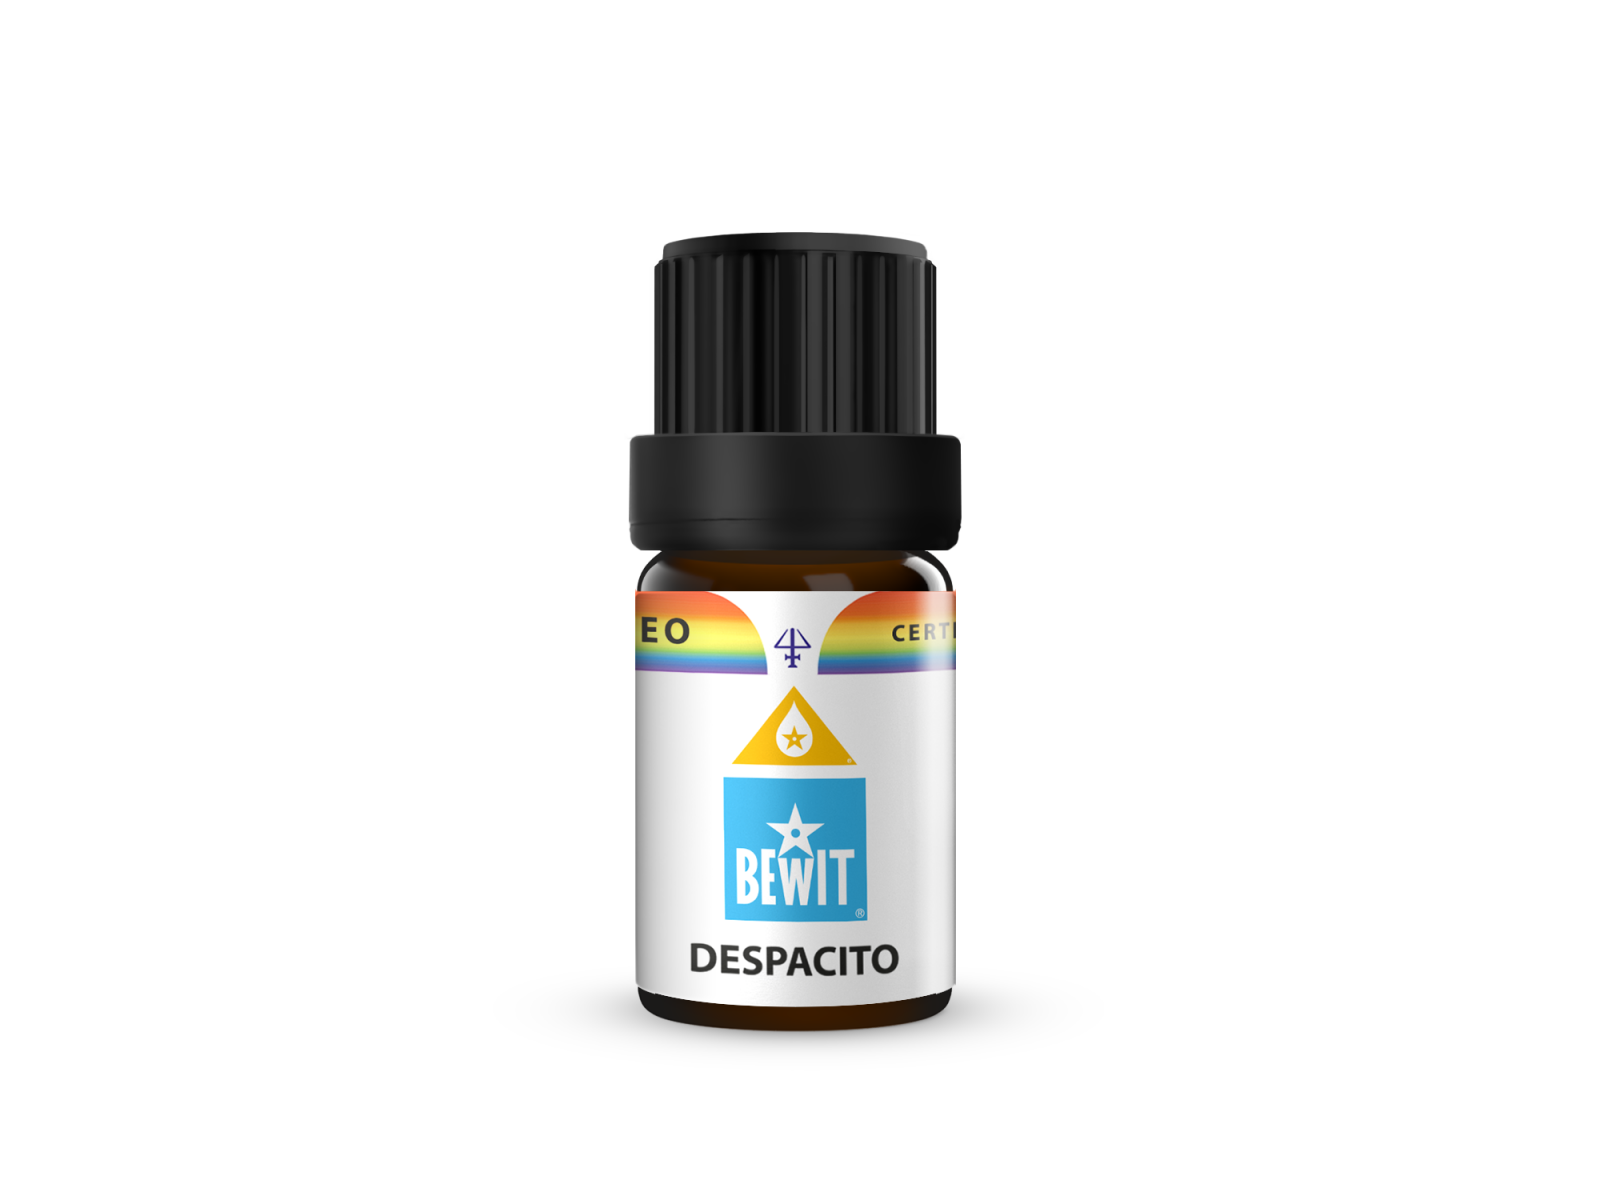 BEWIT Despacito - 100% natural essential oil blend in CTEO® quality - 2